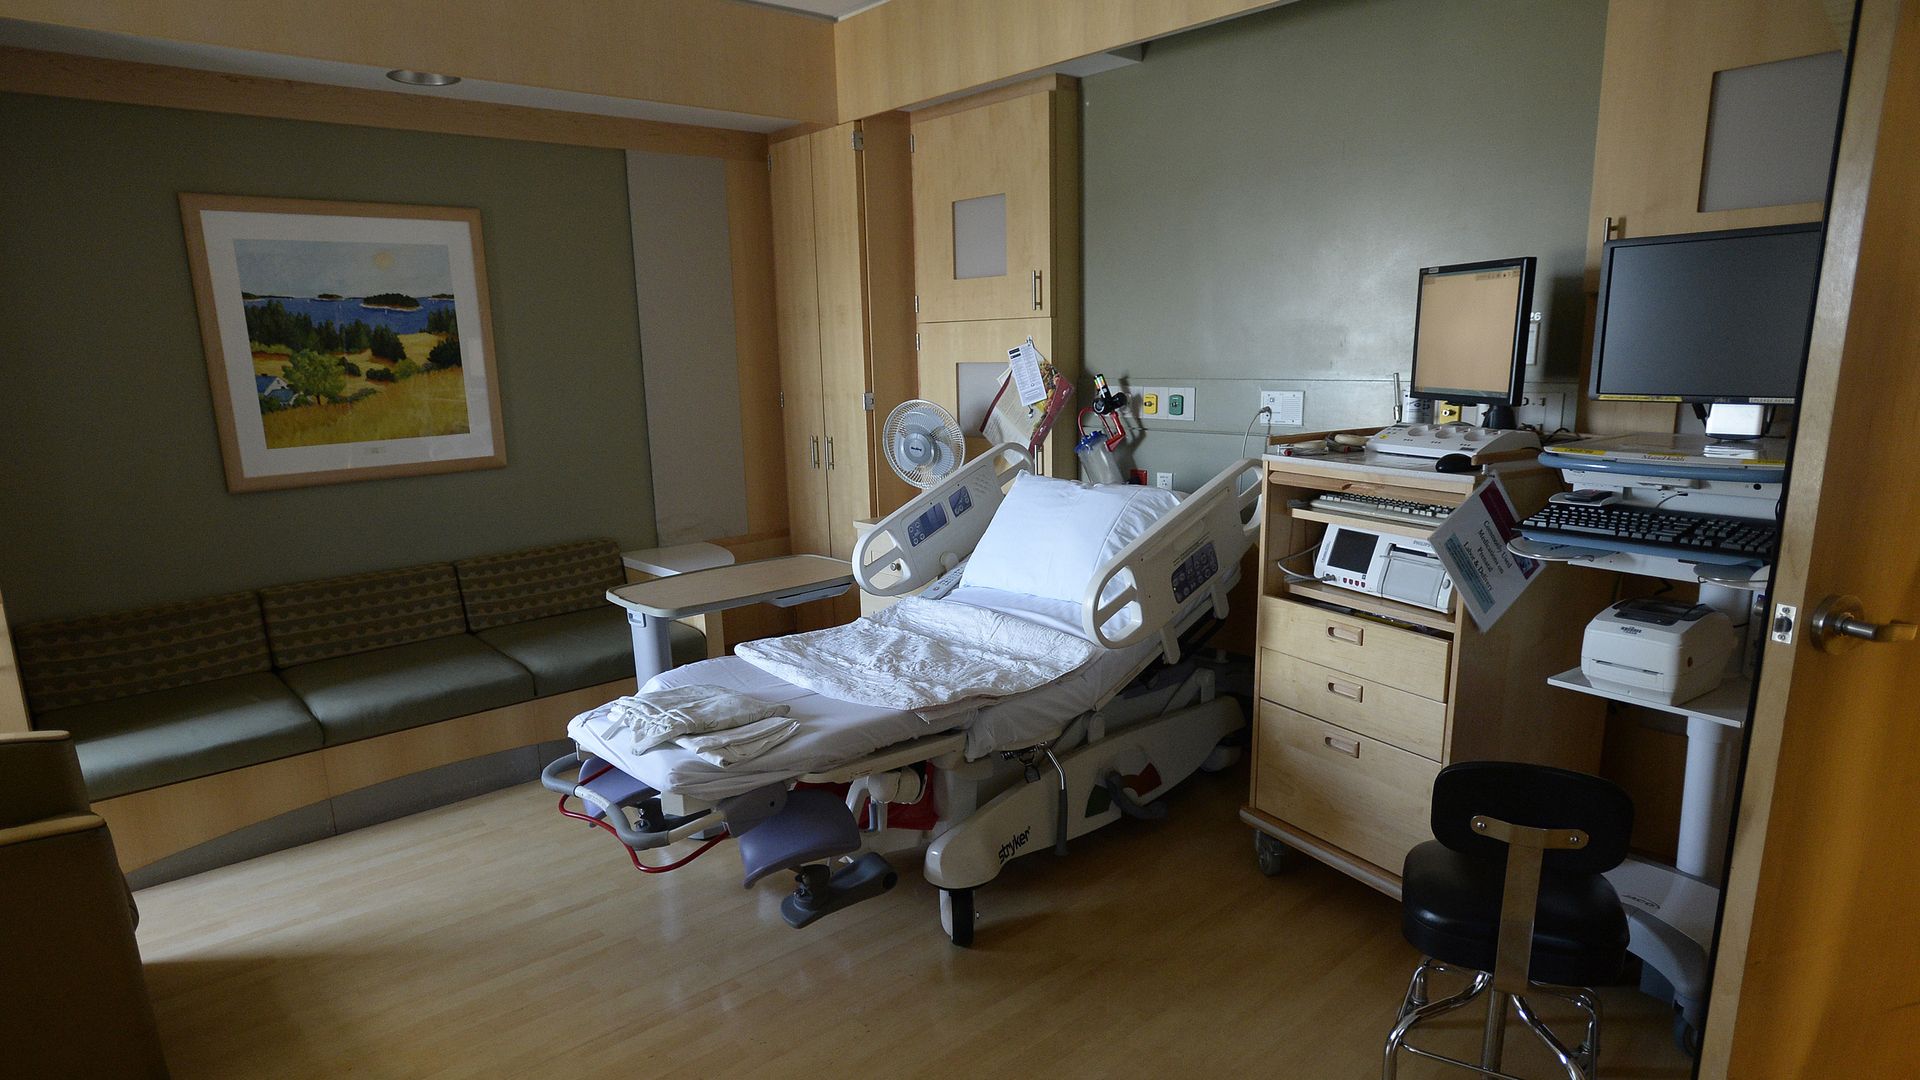 A room in a maternity ward